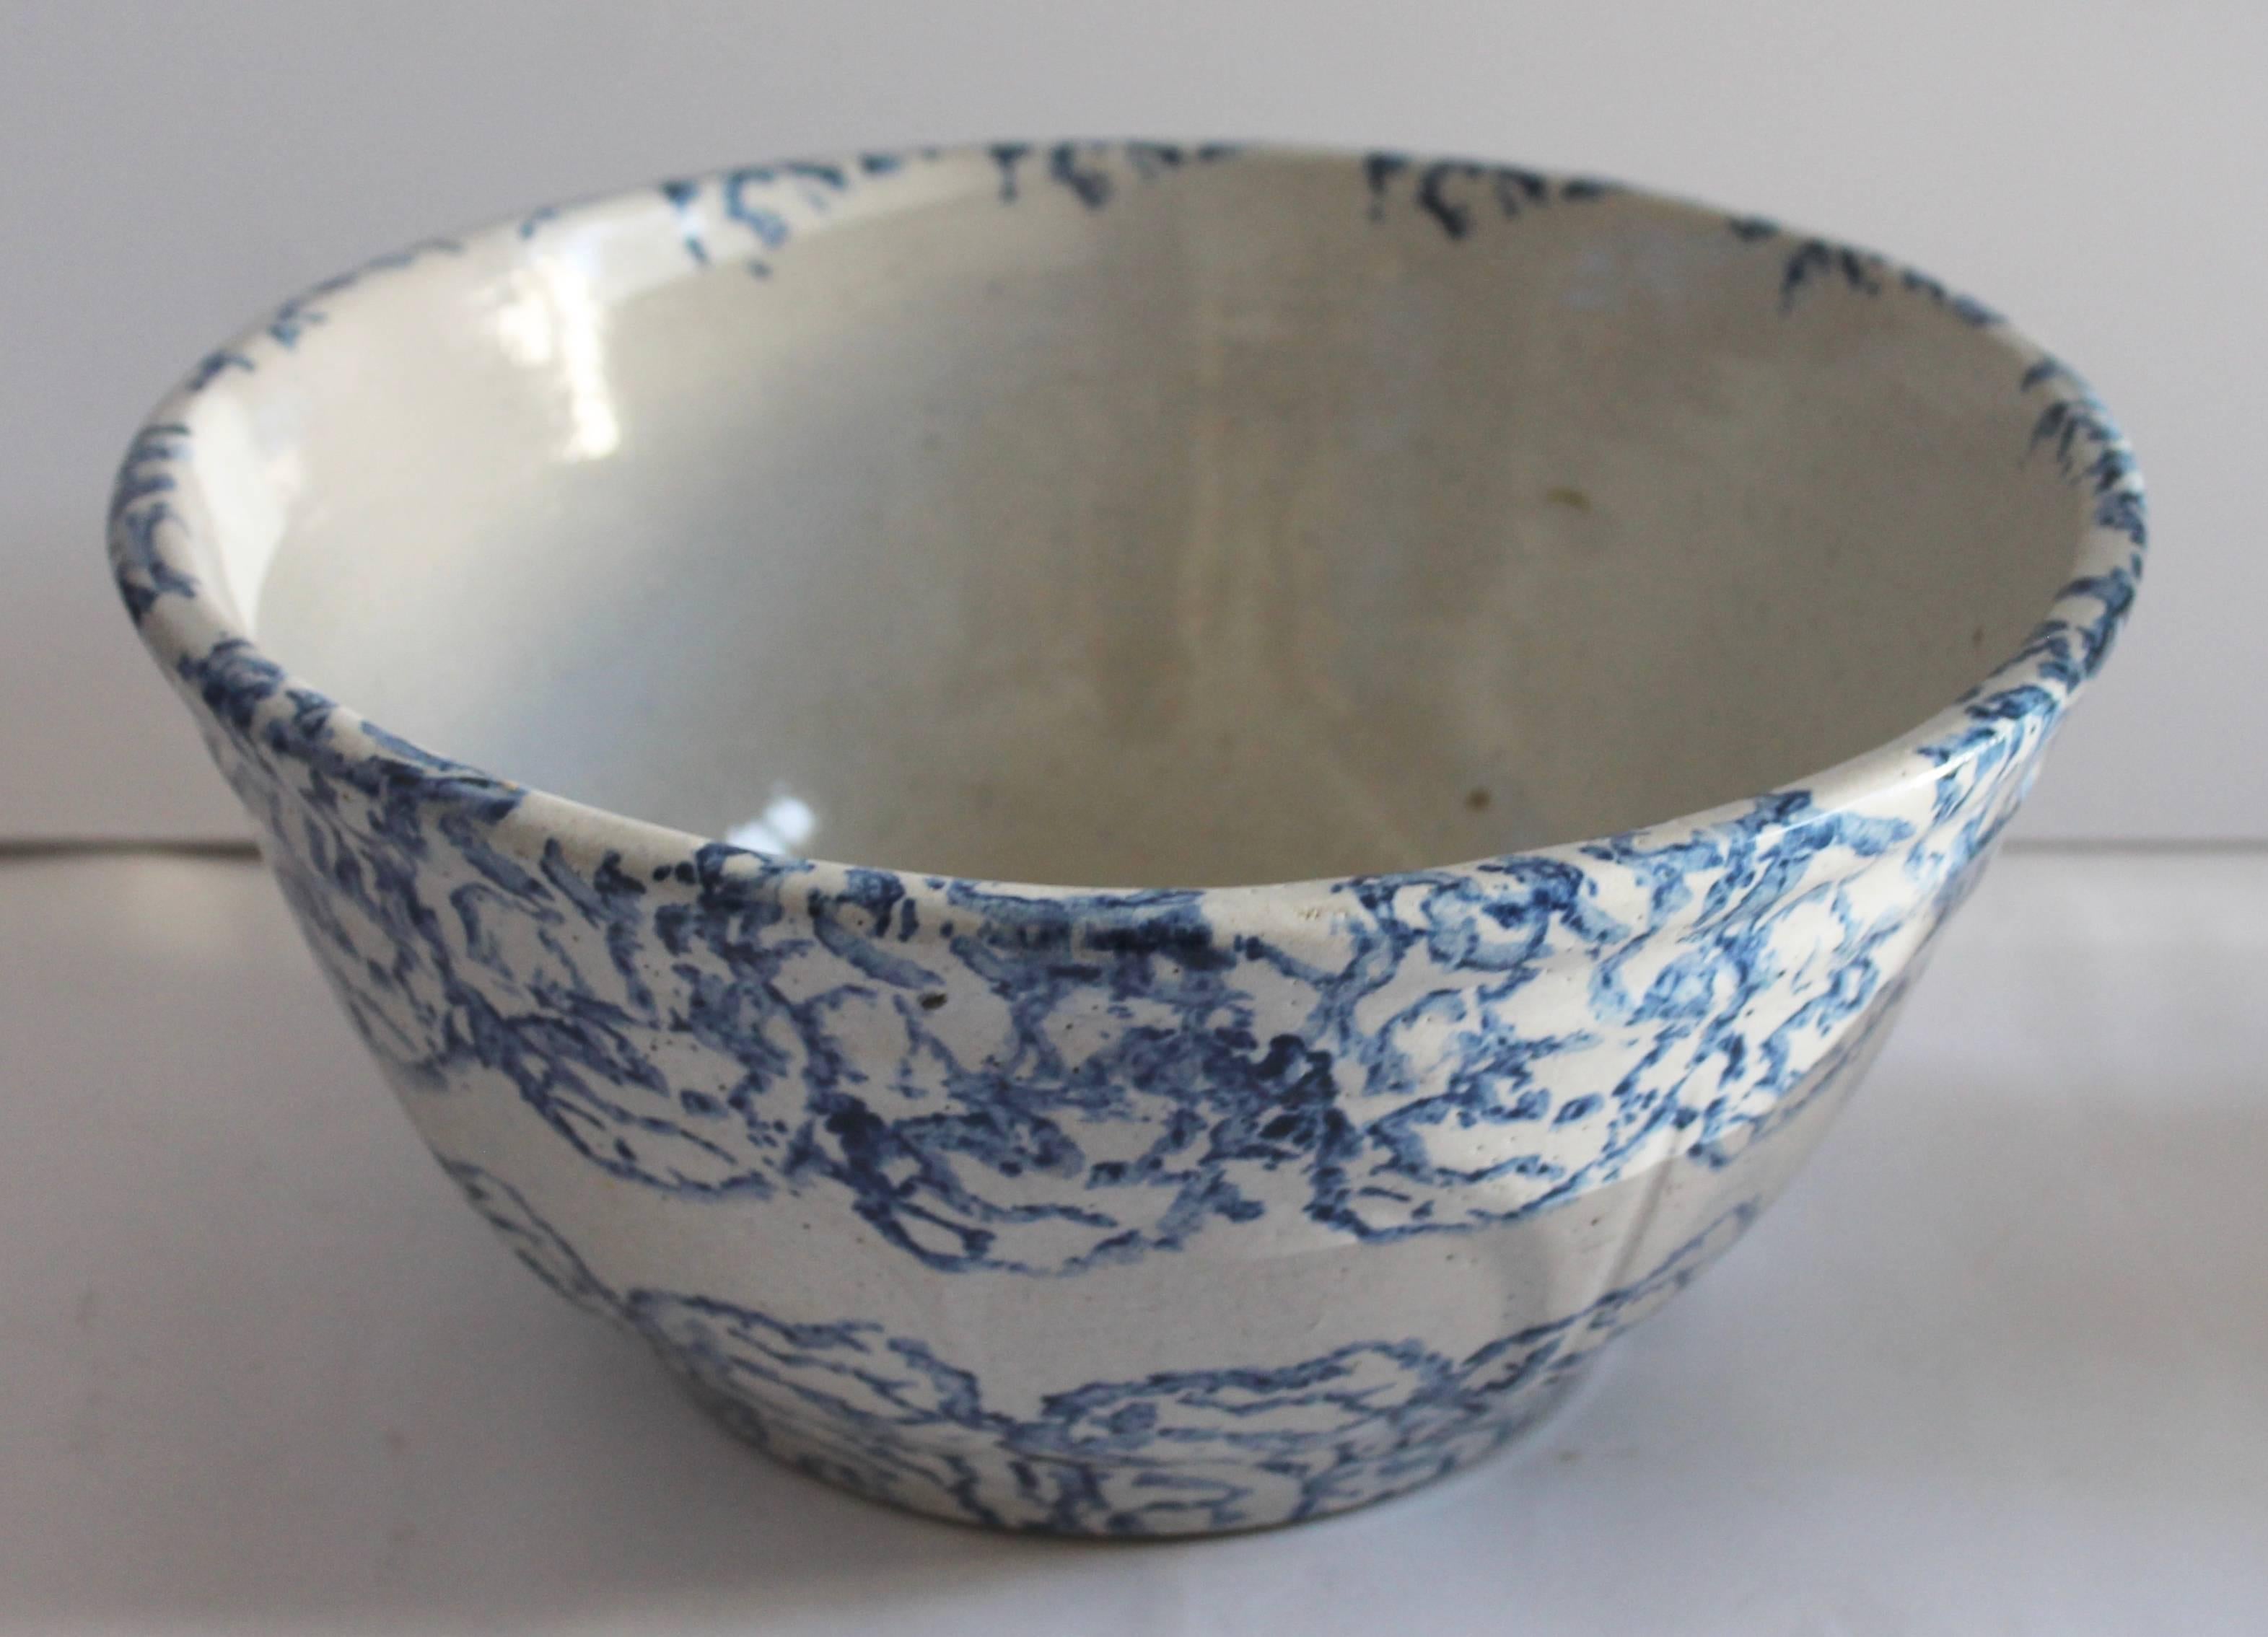 This amazing large spongeware bowl is in pristine condition and has a design sponge pattern or clam shell pattern. It is great as a fruit bowl or center piece bowl on your dining room or kitchen table.